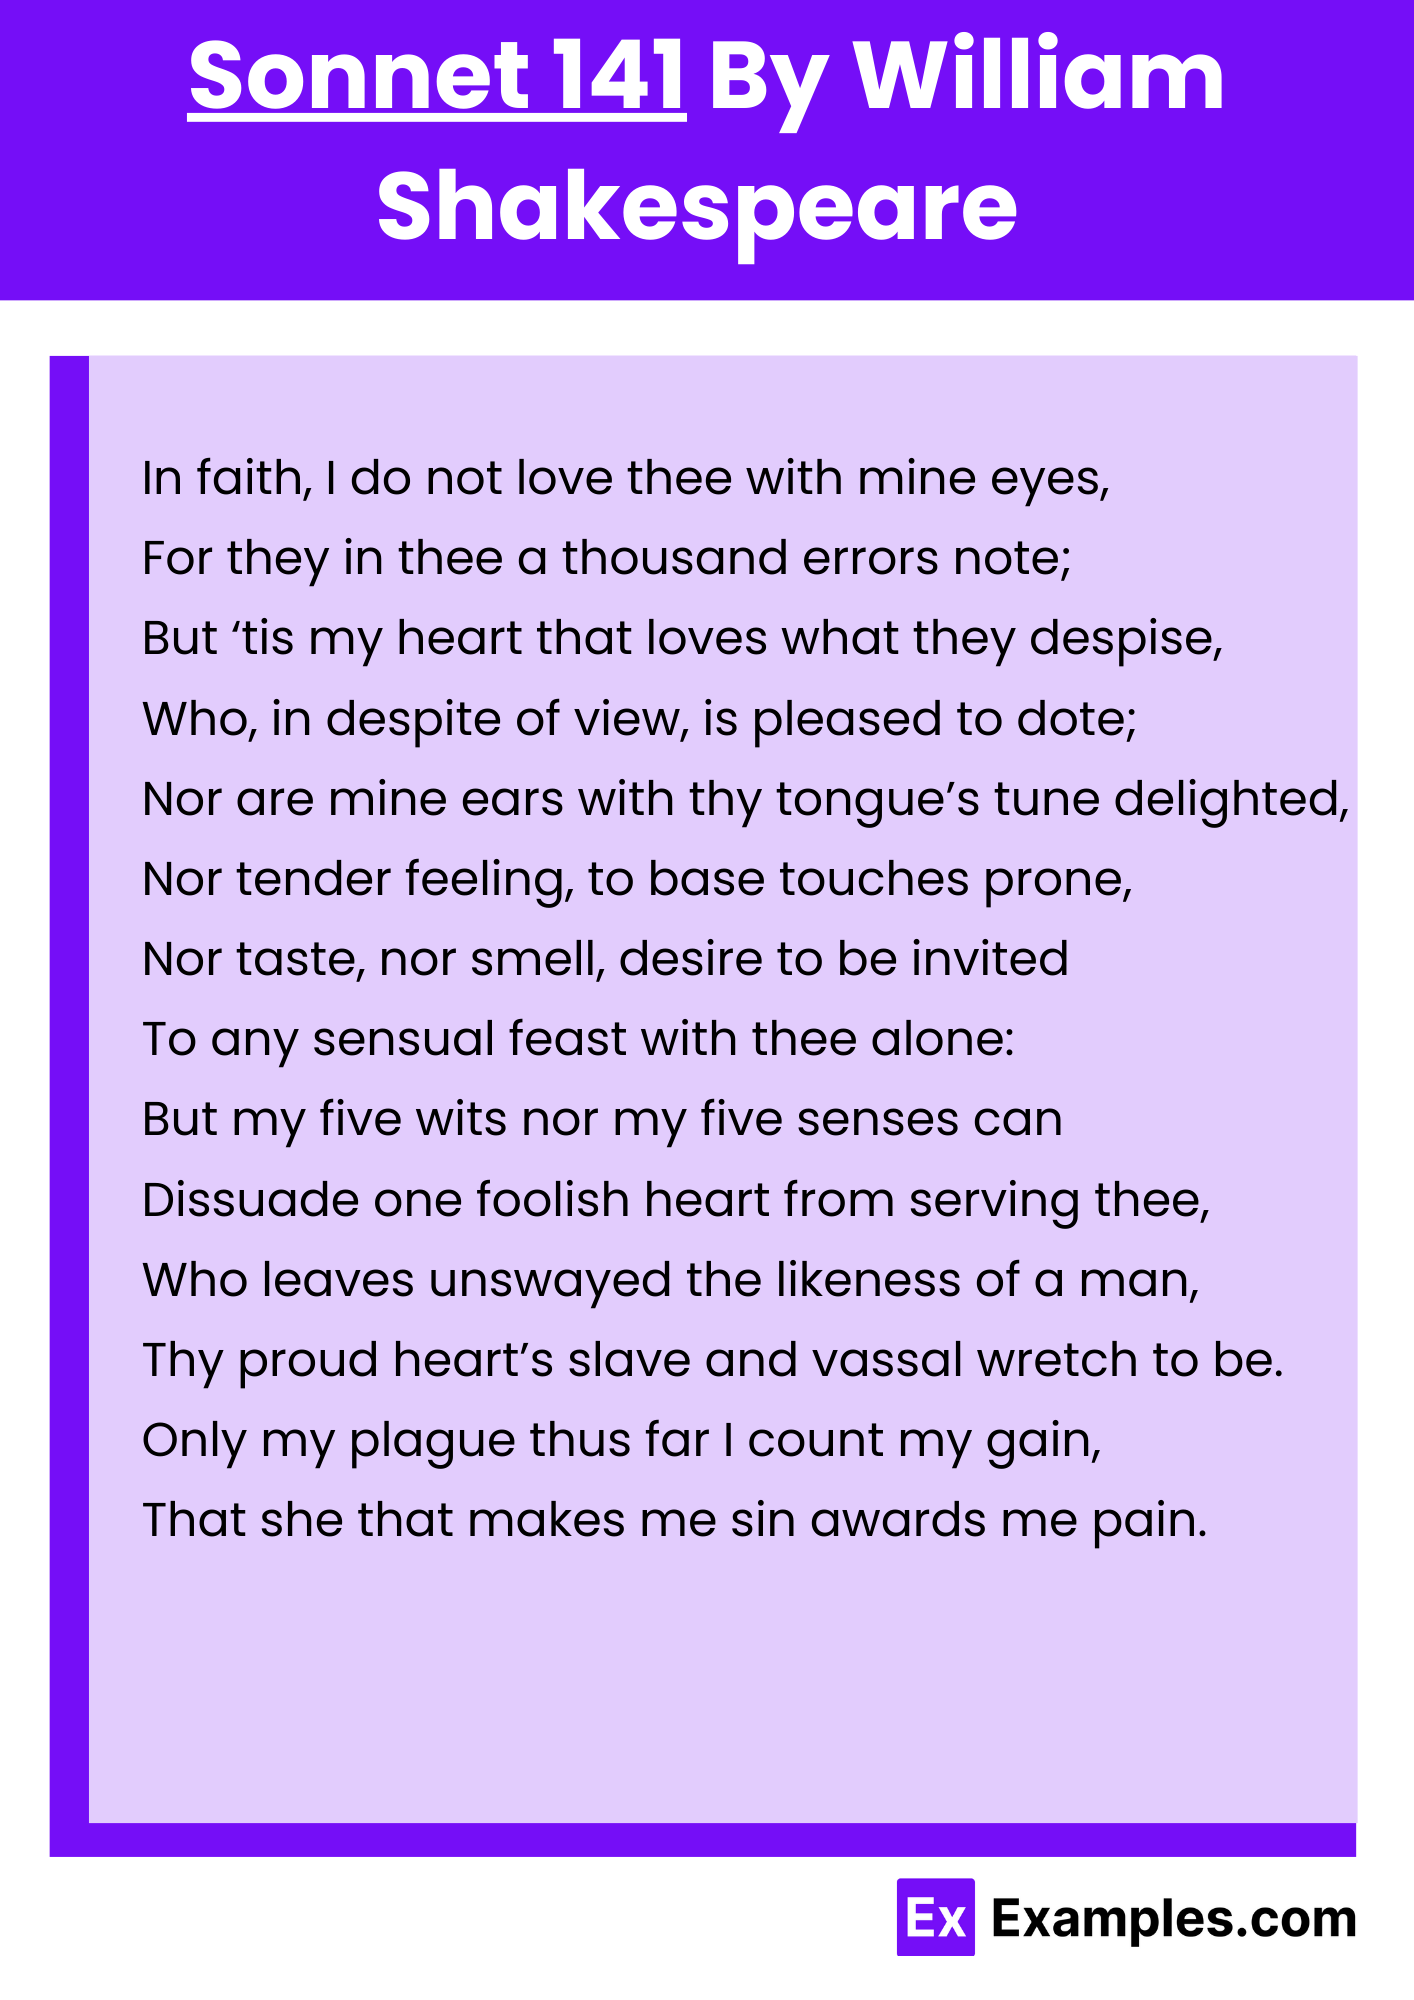 Sonnet 141 By William Shakespeare